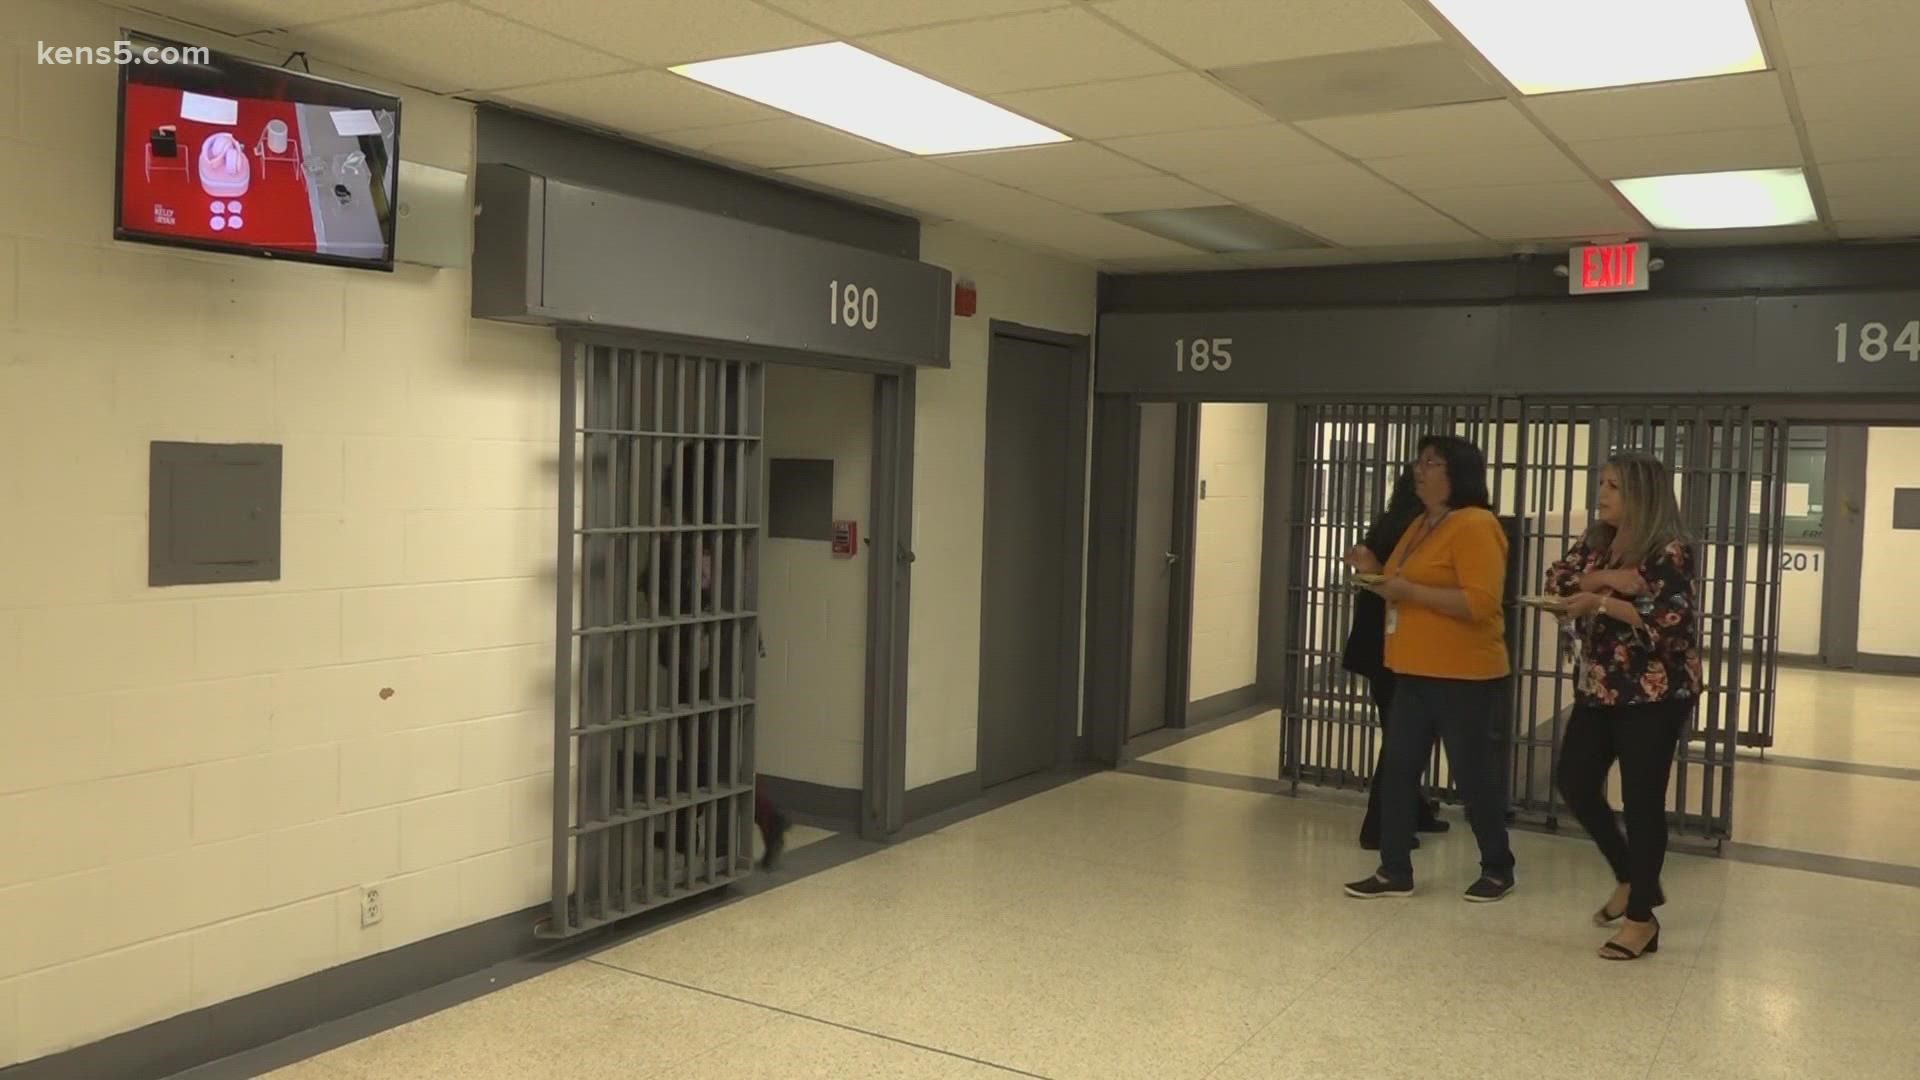 The Frio County Sheriff's Office and county leaders celebrated the reopening of the jail after it was shut down by the state in 2015.